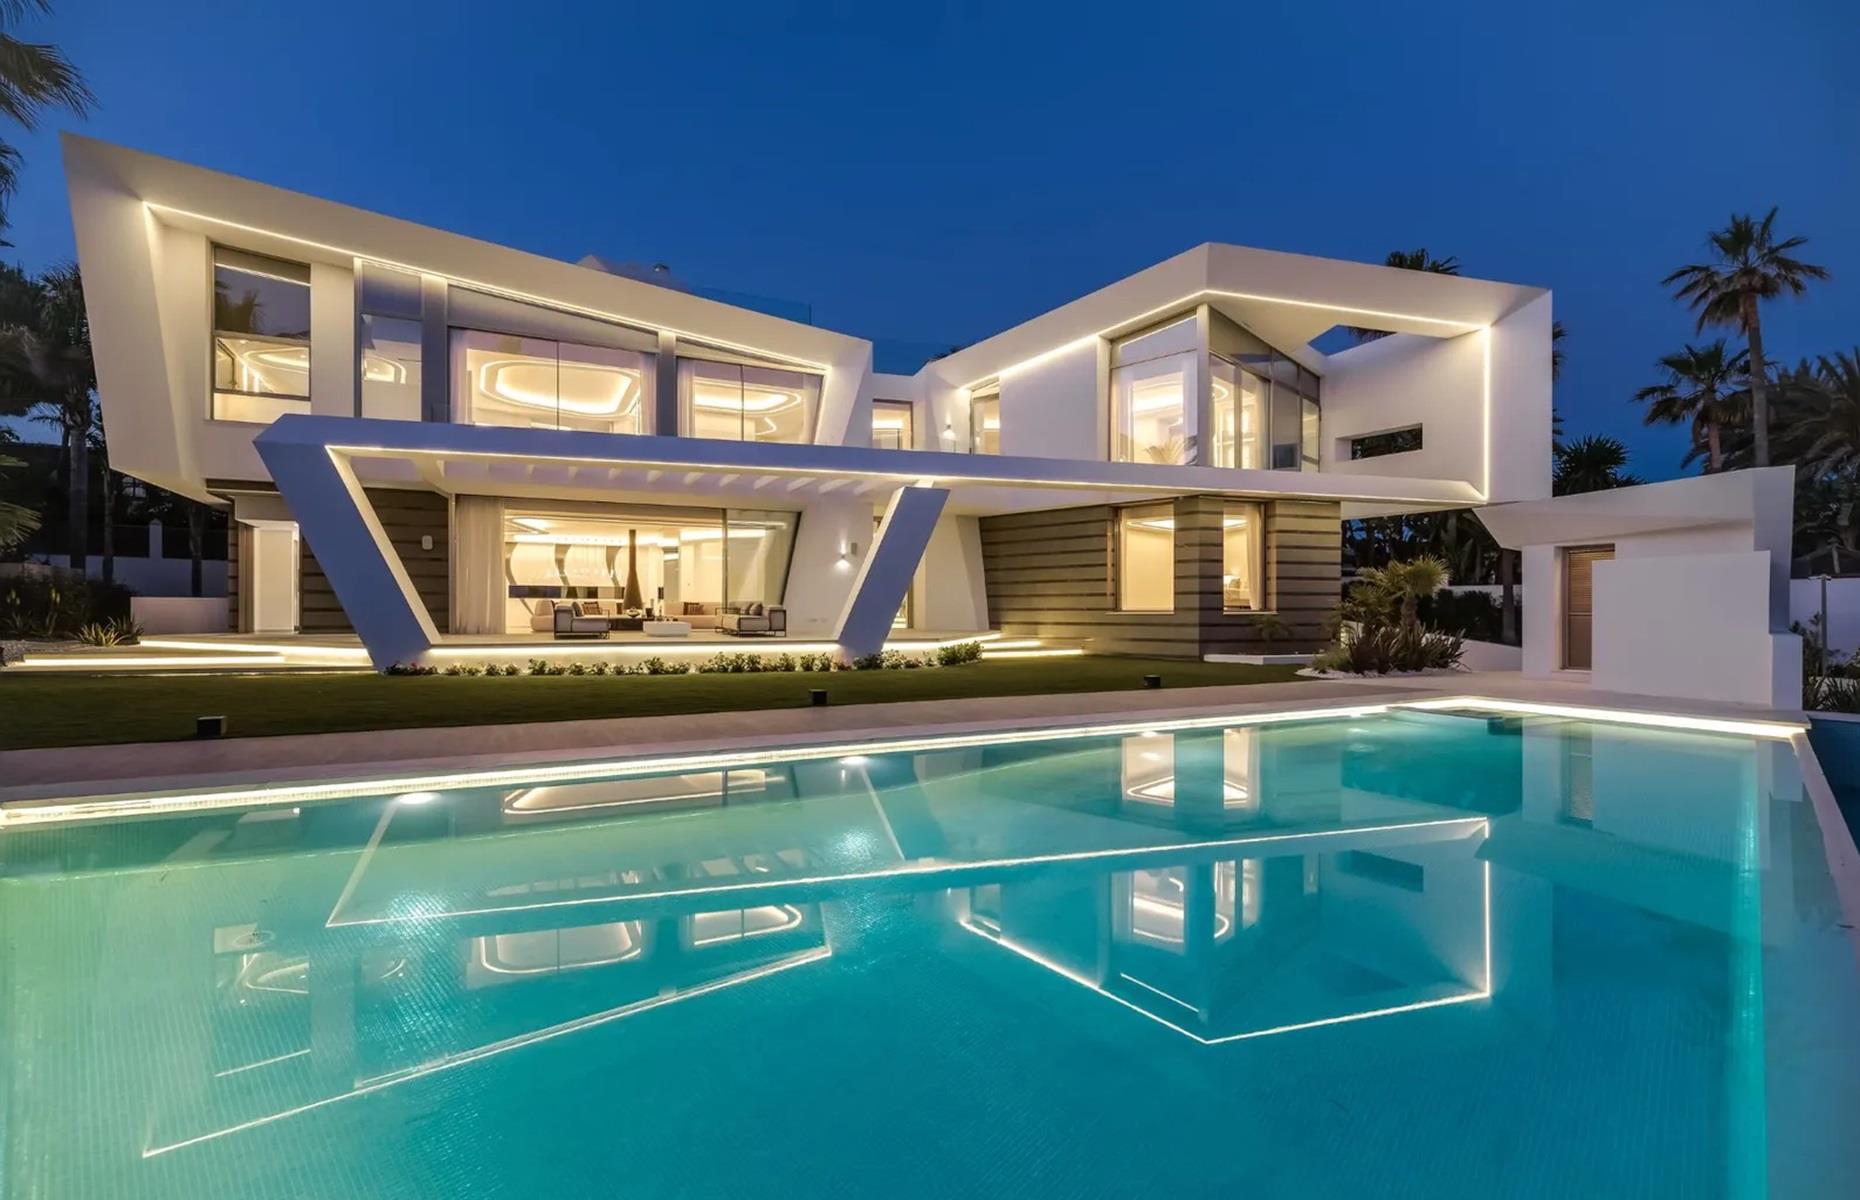 <p>Plus, there's an absolutely stunning backyard and a private rooftop terrace, where dreamy <a href="https://www.loveproperty.com/gallerylist/54730/11-incredible-homes-by-the-sea">sea views</a> can be savoured. The latter comes with a Jacuzzi pool, numerous lounging areas and dining decks for sunbathing and entertaining in style.</p>  <p>Loved this? <a href="https://bit.ly/45Wk23x"><strong>Follow us on Facebook</strong></a> for more incredible modern homes.</p>